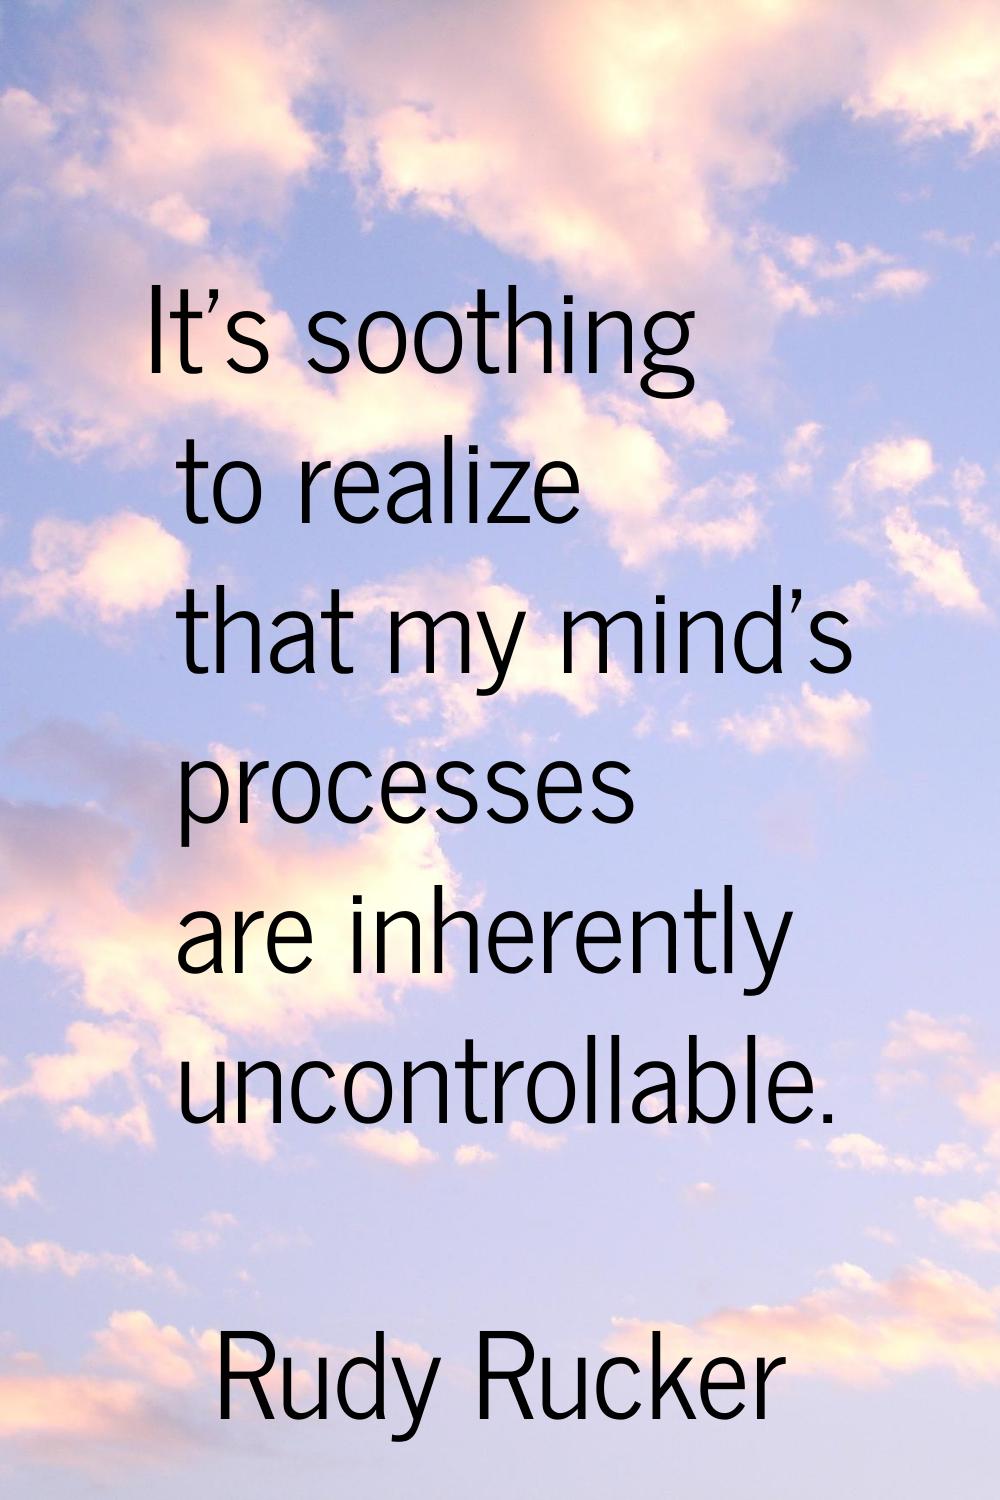 It's soothing to realize that my mind's processes are inherently uncontrollable.